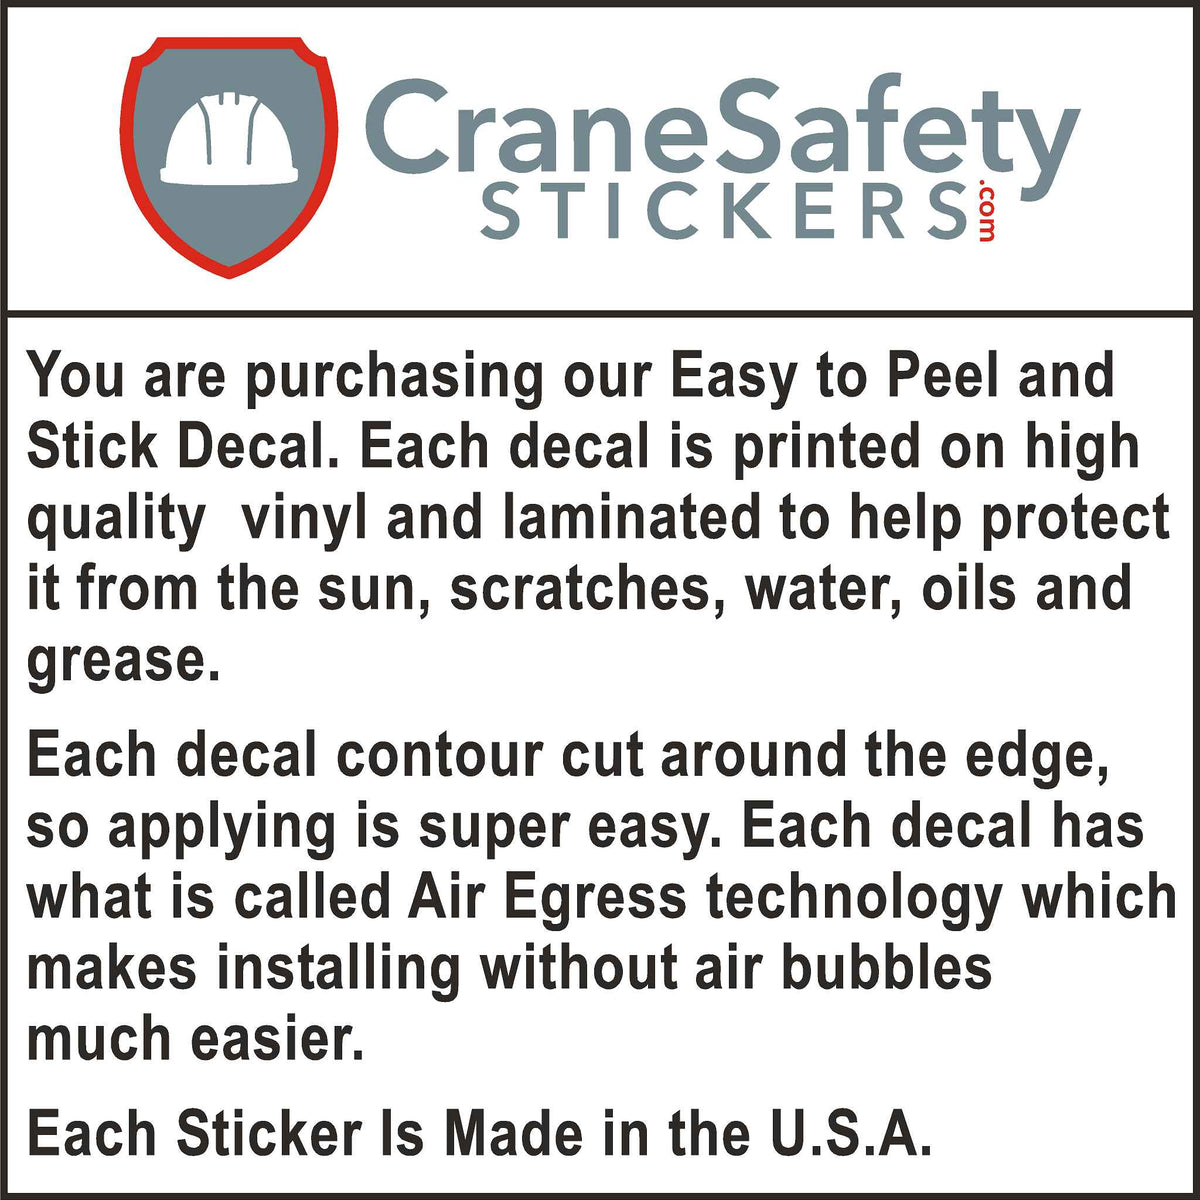 The quality of our wire rope danger crane safety sticker.